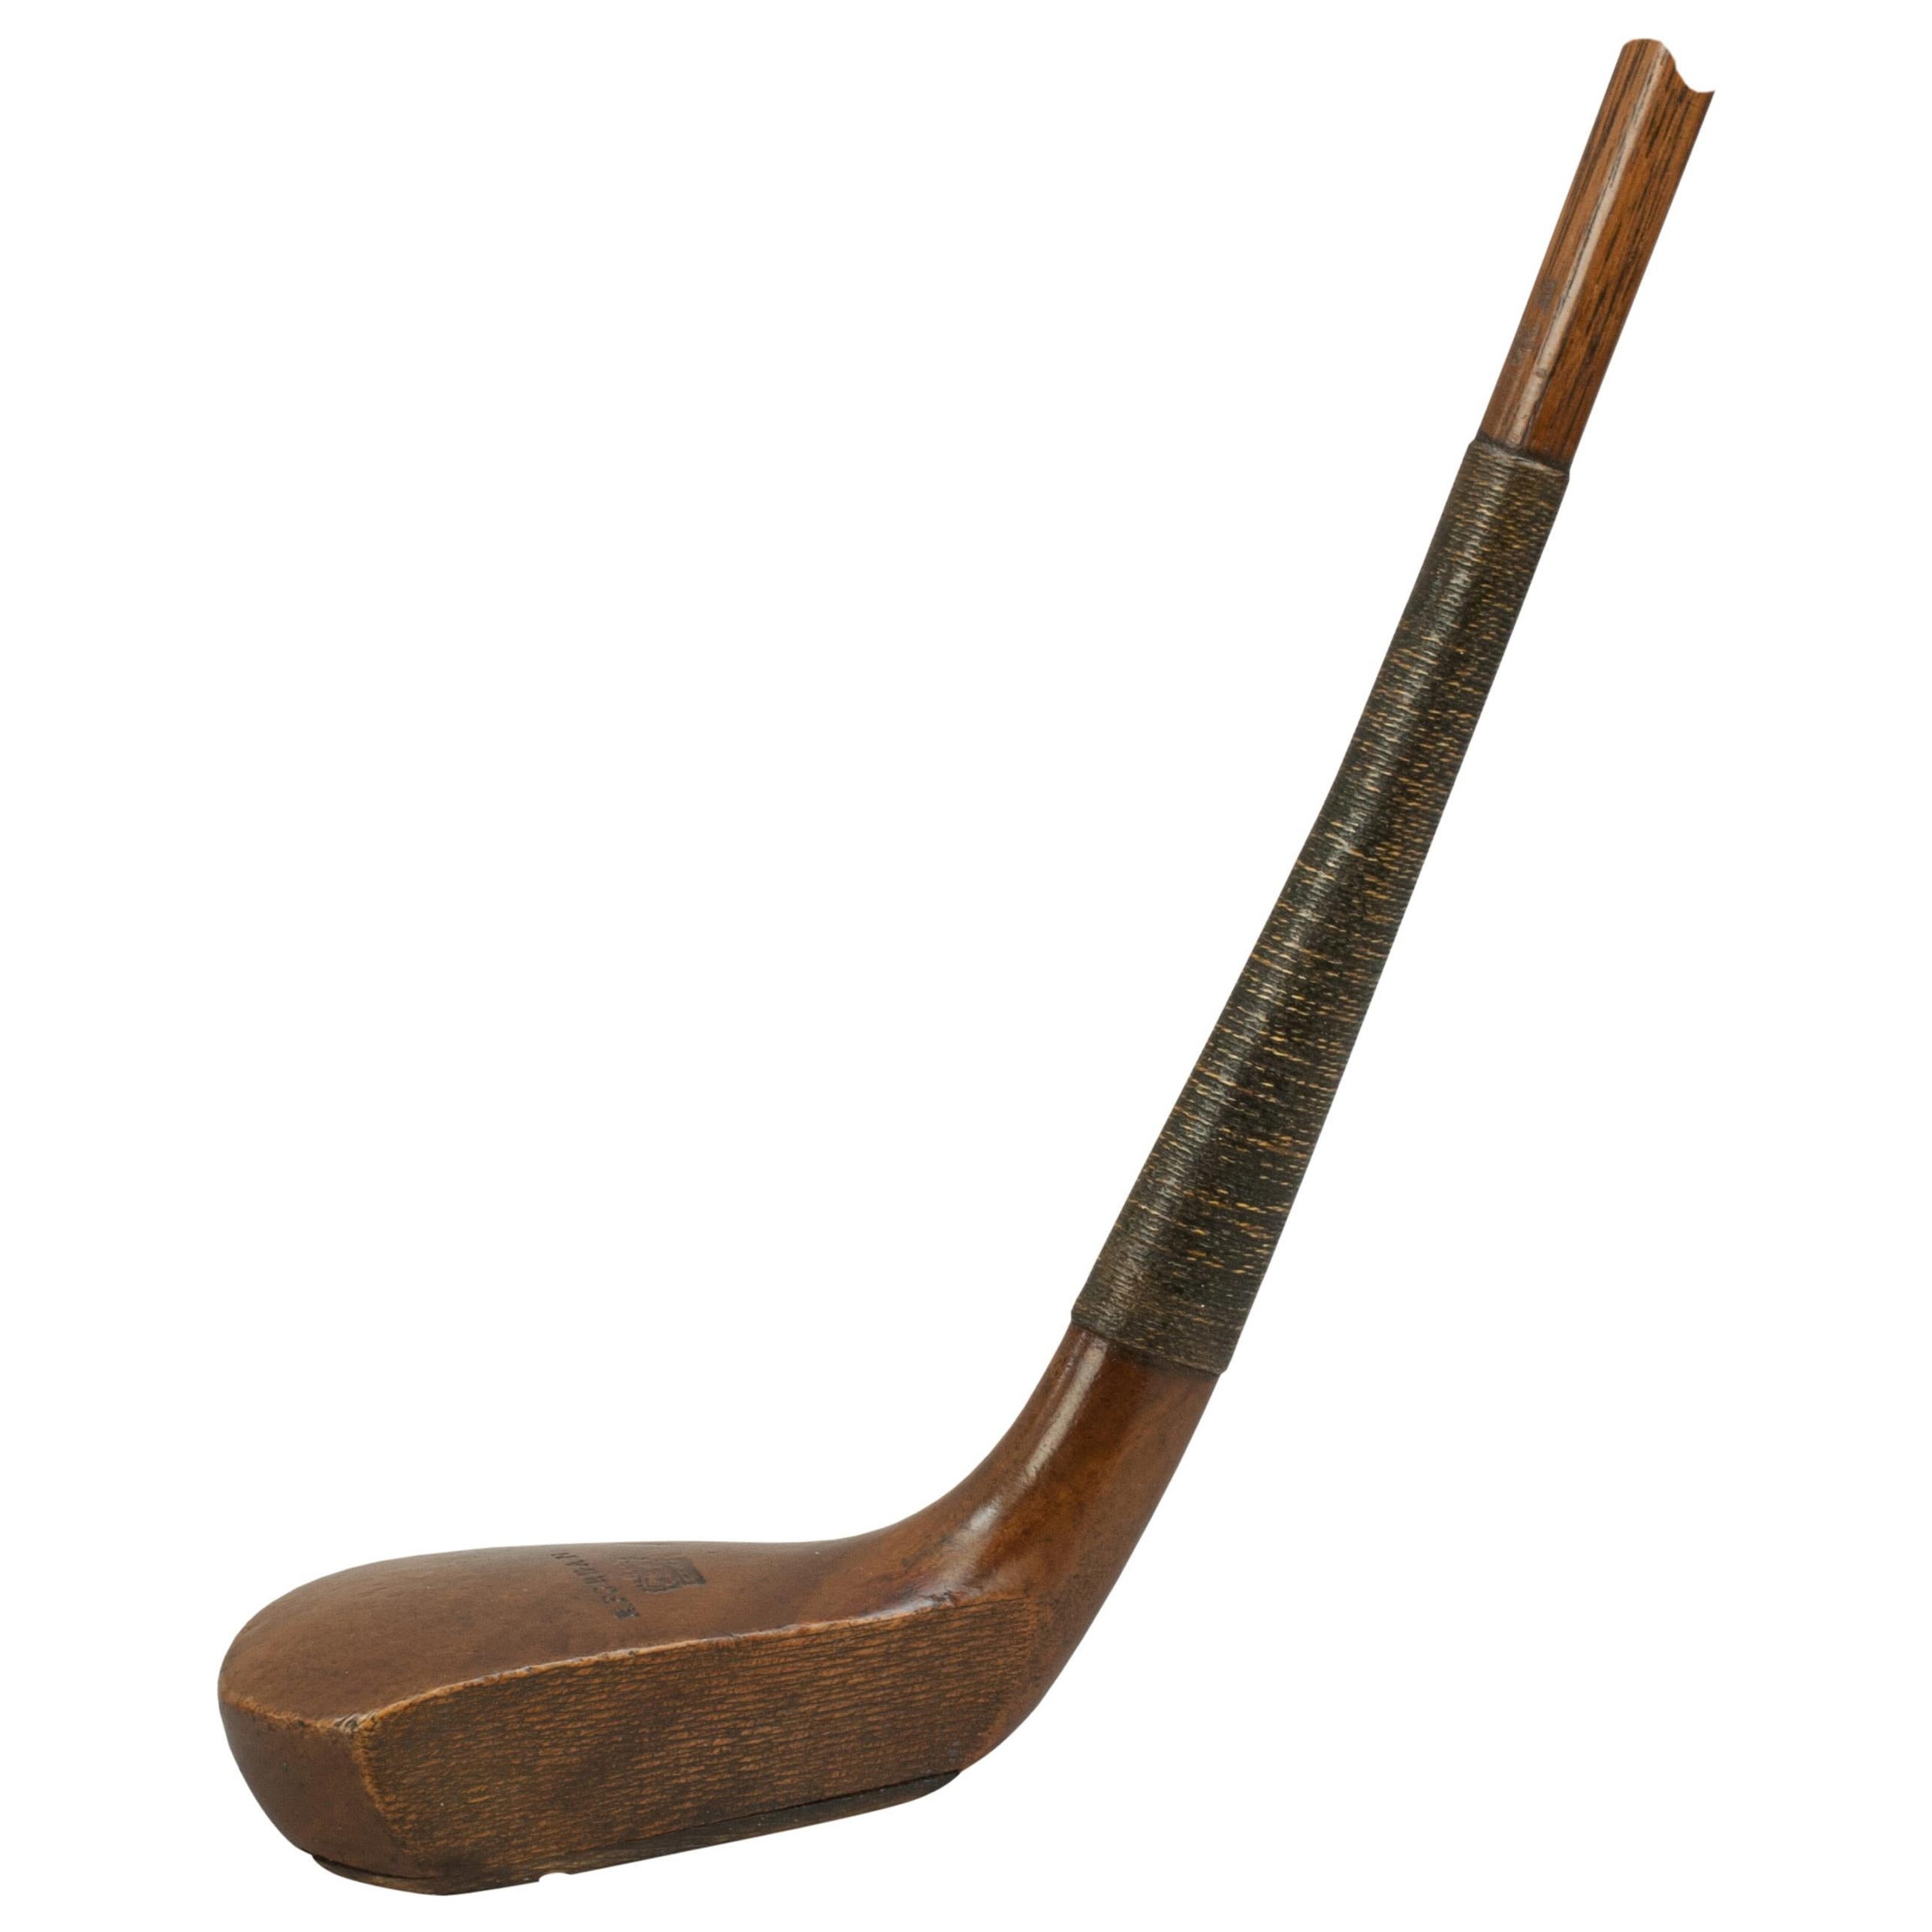 Antique Golf Club, Large Wood Head Croquet Type Putter For Sale at 1stDibs